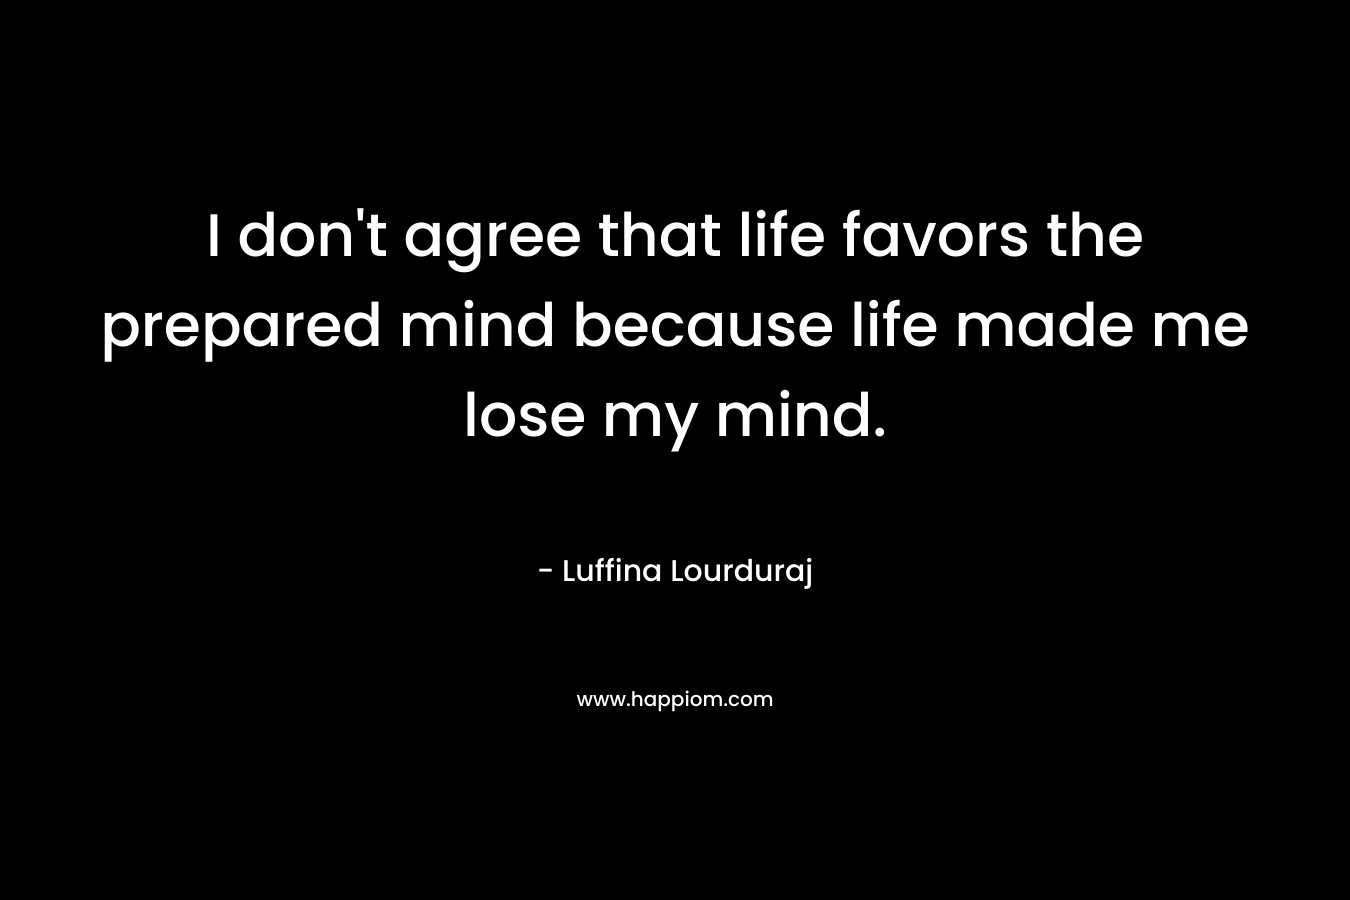 I don't agree that life favors the prepared mind because life made me lose my mind.